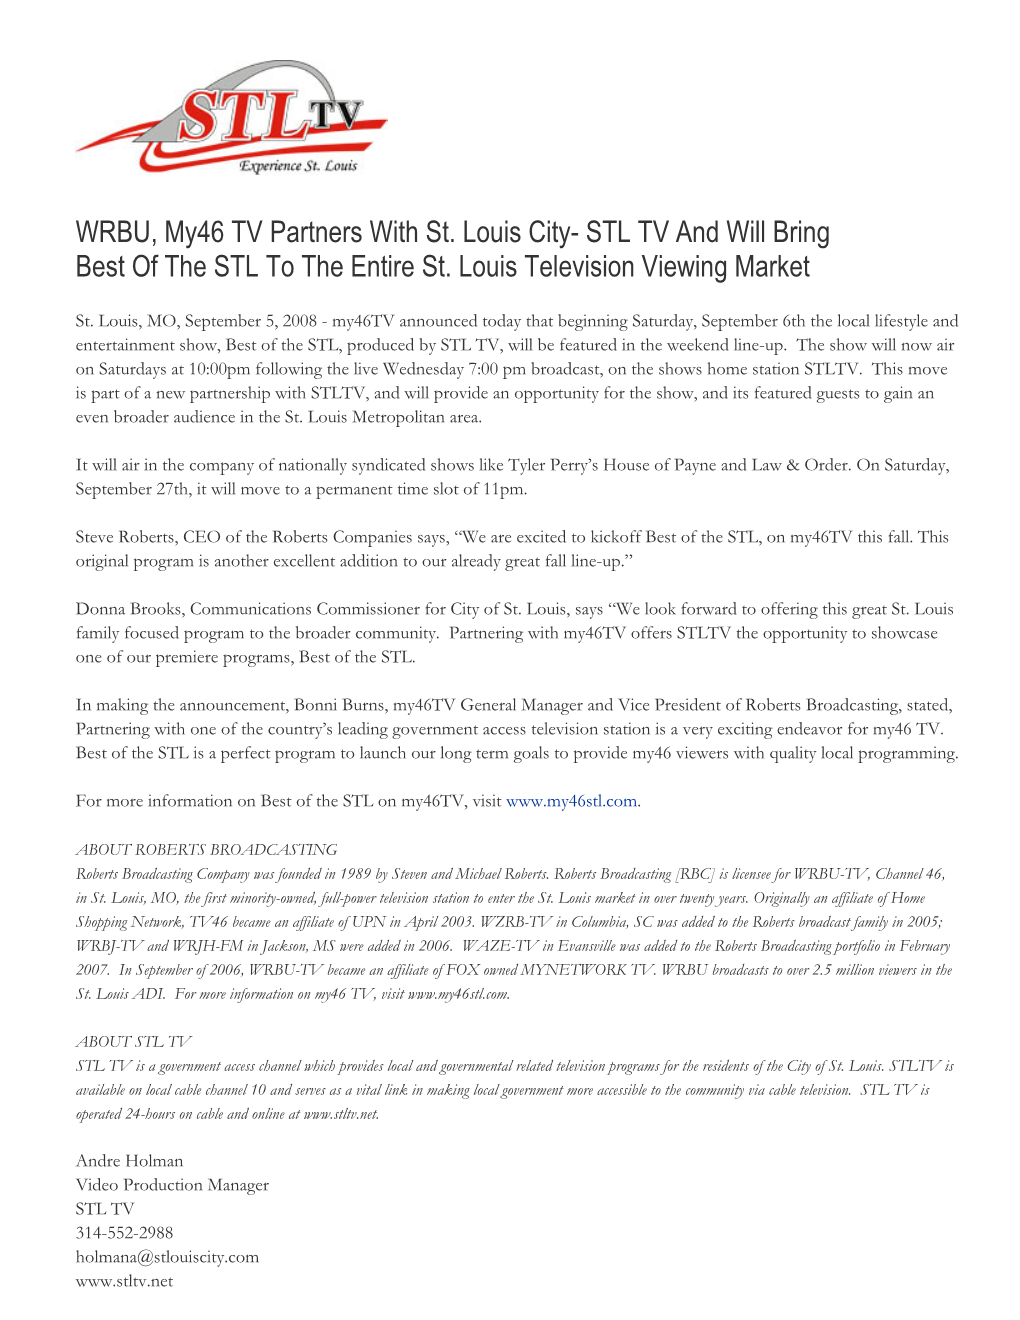 WRBU, My46 TV Partners with St. Louis City- STL TV and Will Bring Best of the STL to the Entire St